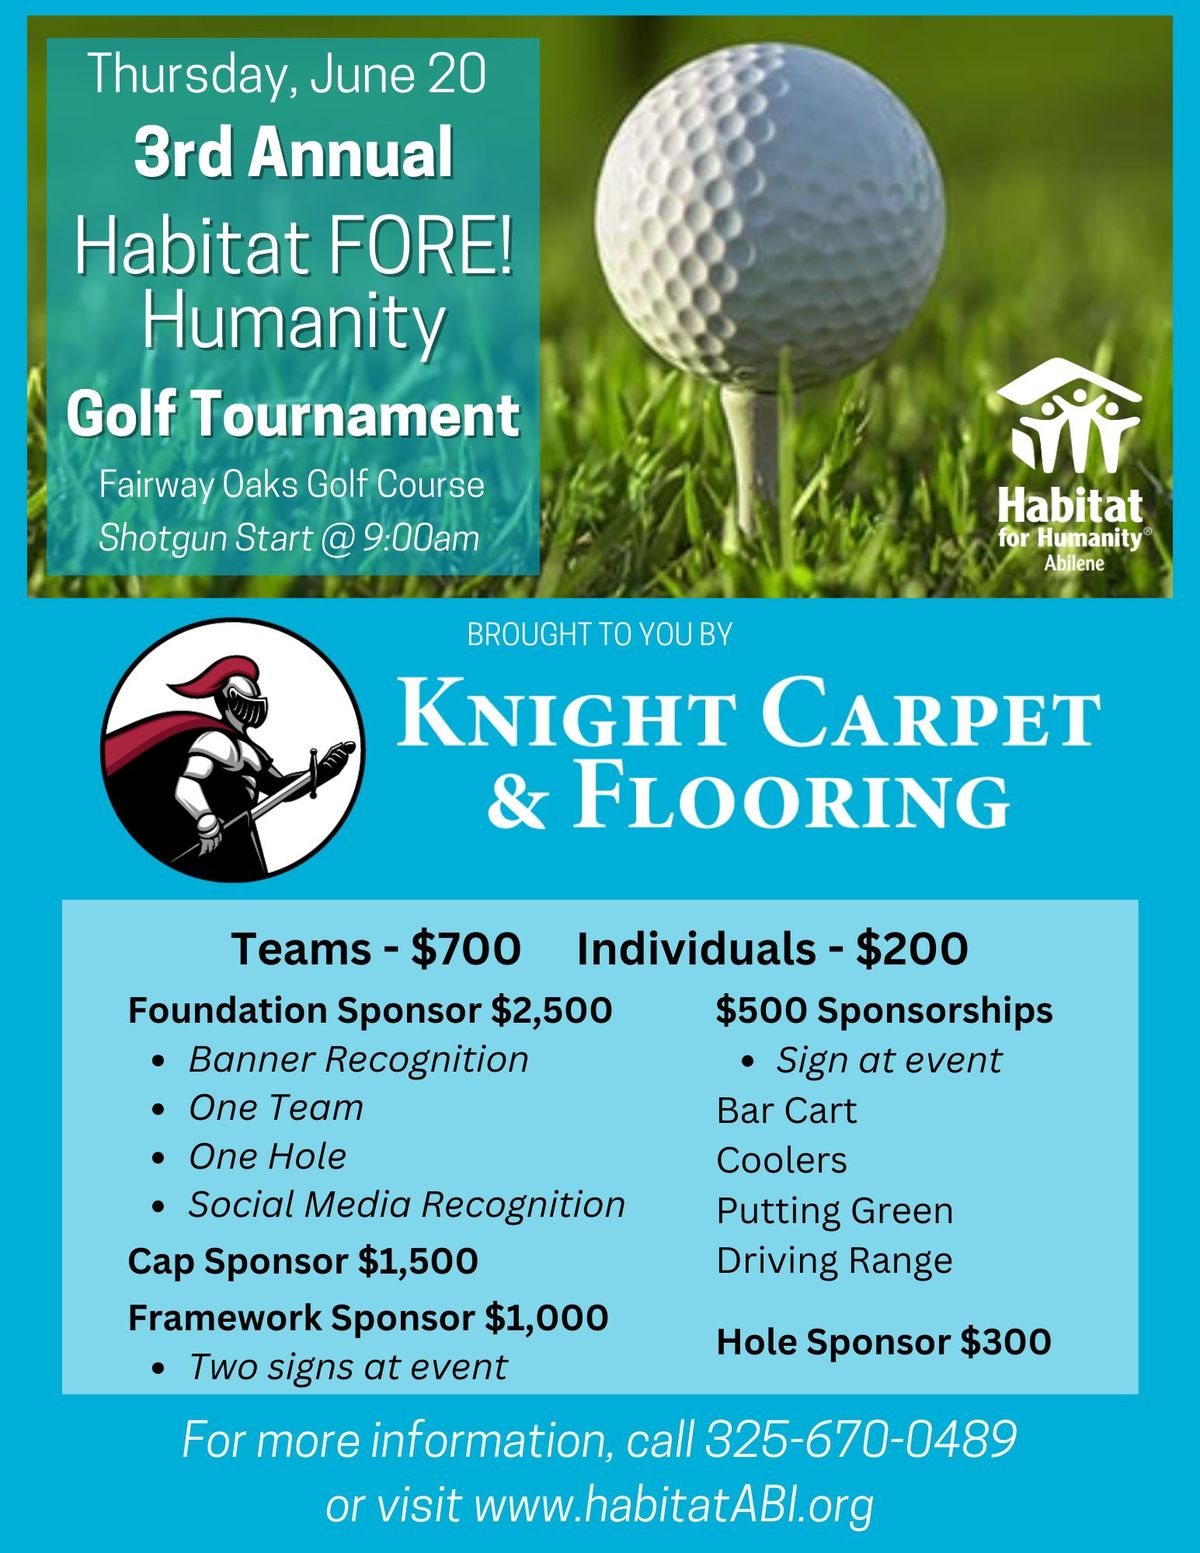 Habitat FORE! Humanity Golf Tournament brought to you by Knight Carpet & Flooring